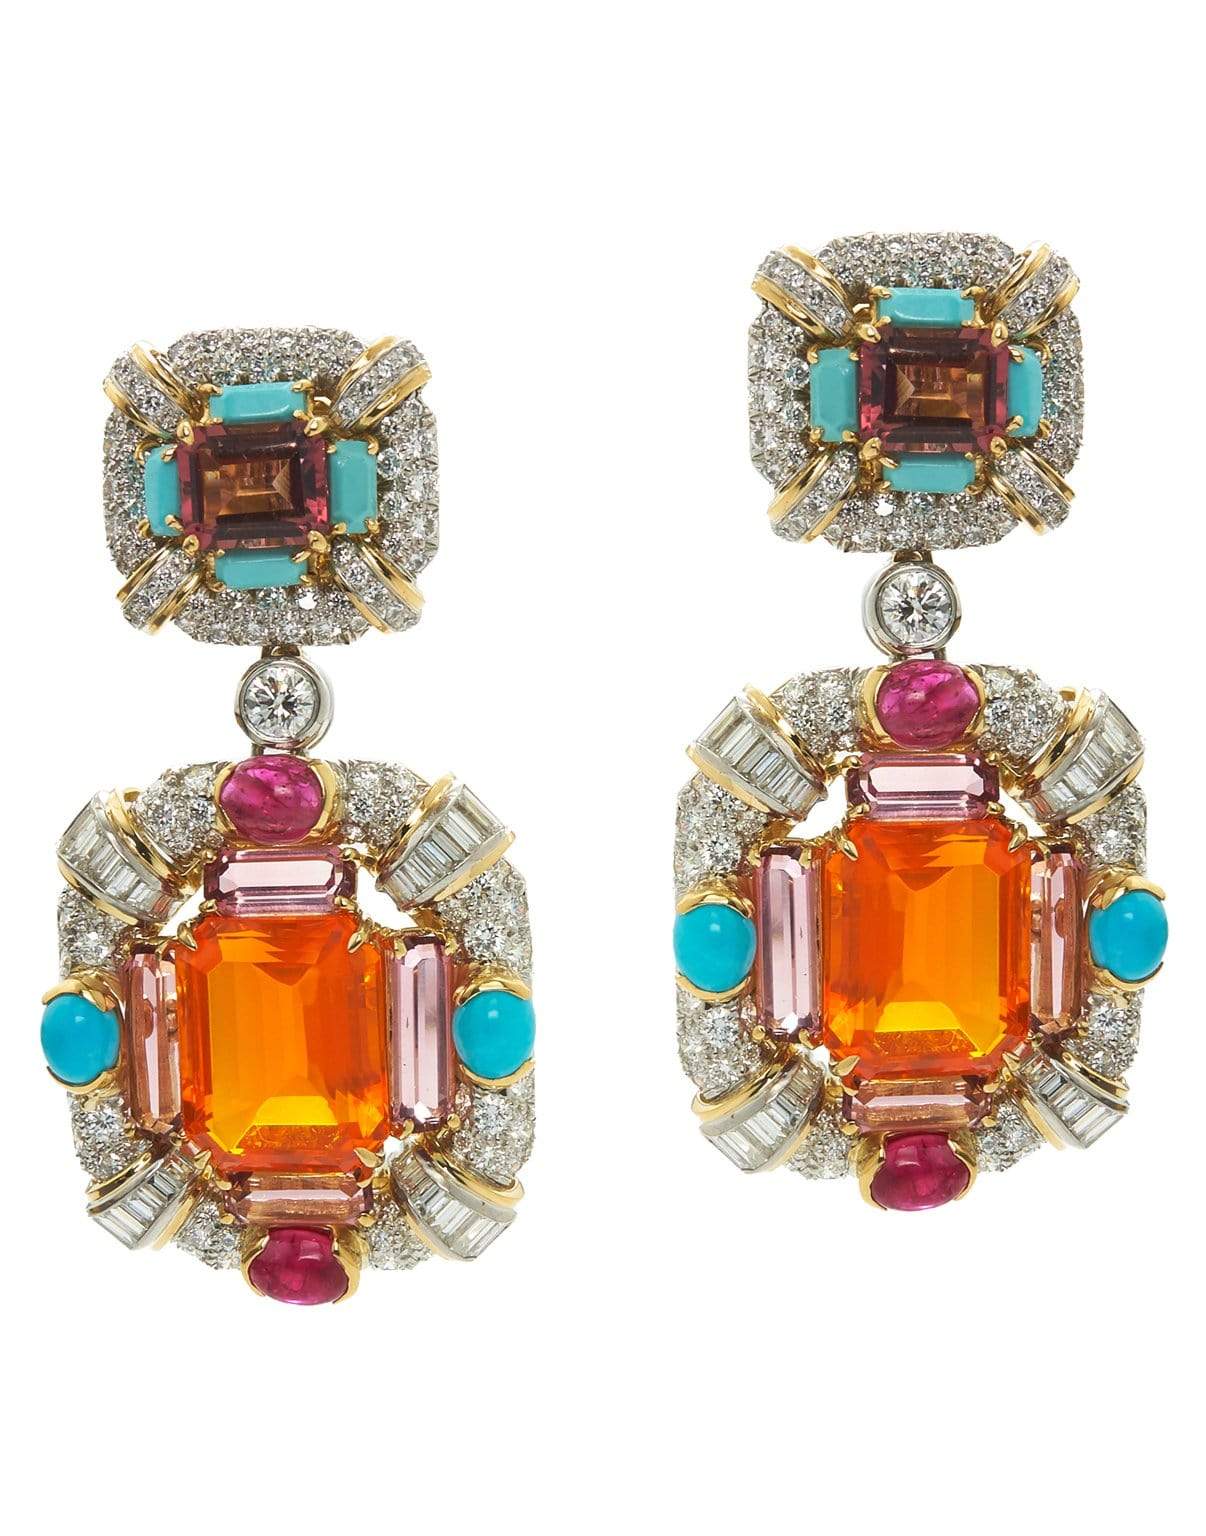 DAVID WEBB-Couture Fire Opal, Turquoise and Diamond Earrings-YELLOW GOLD